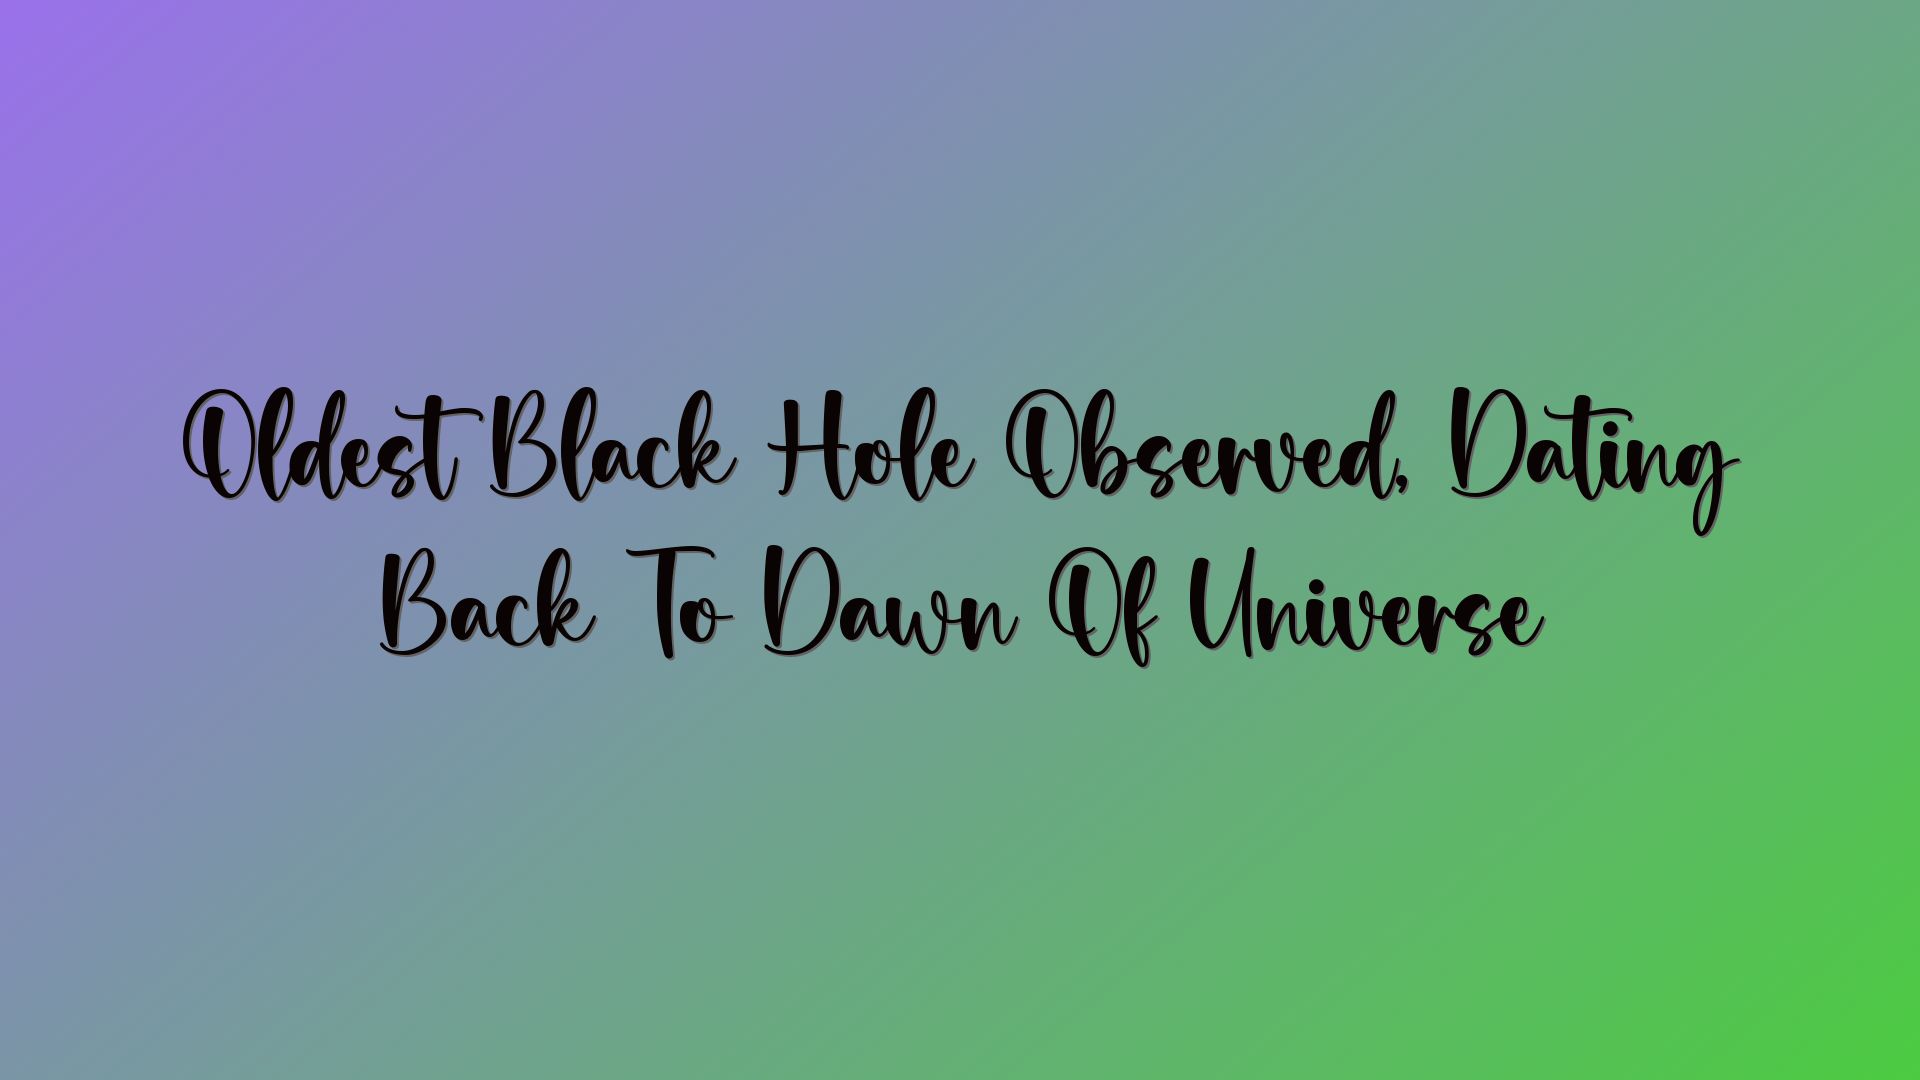 Oldest Black Hole Observed, Dating Back To Dawn Of Universe